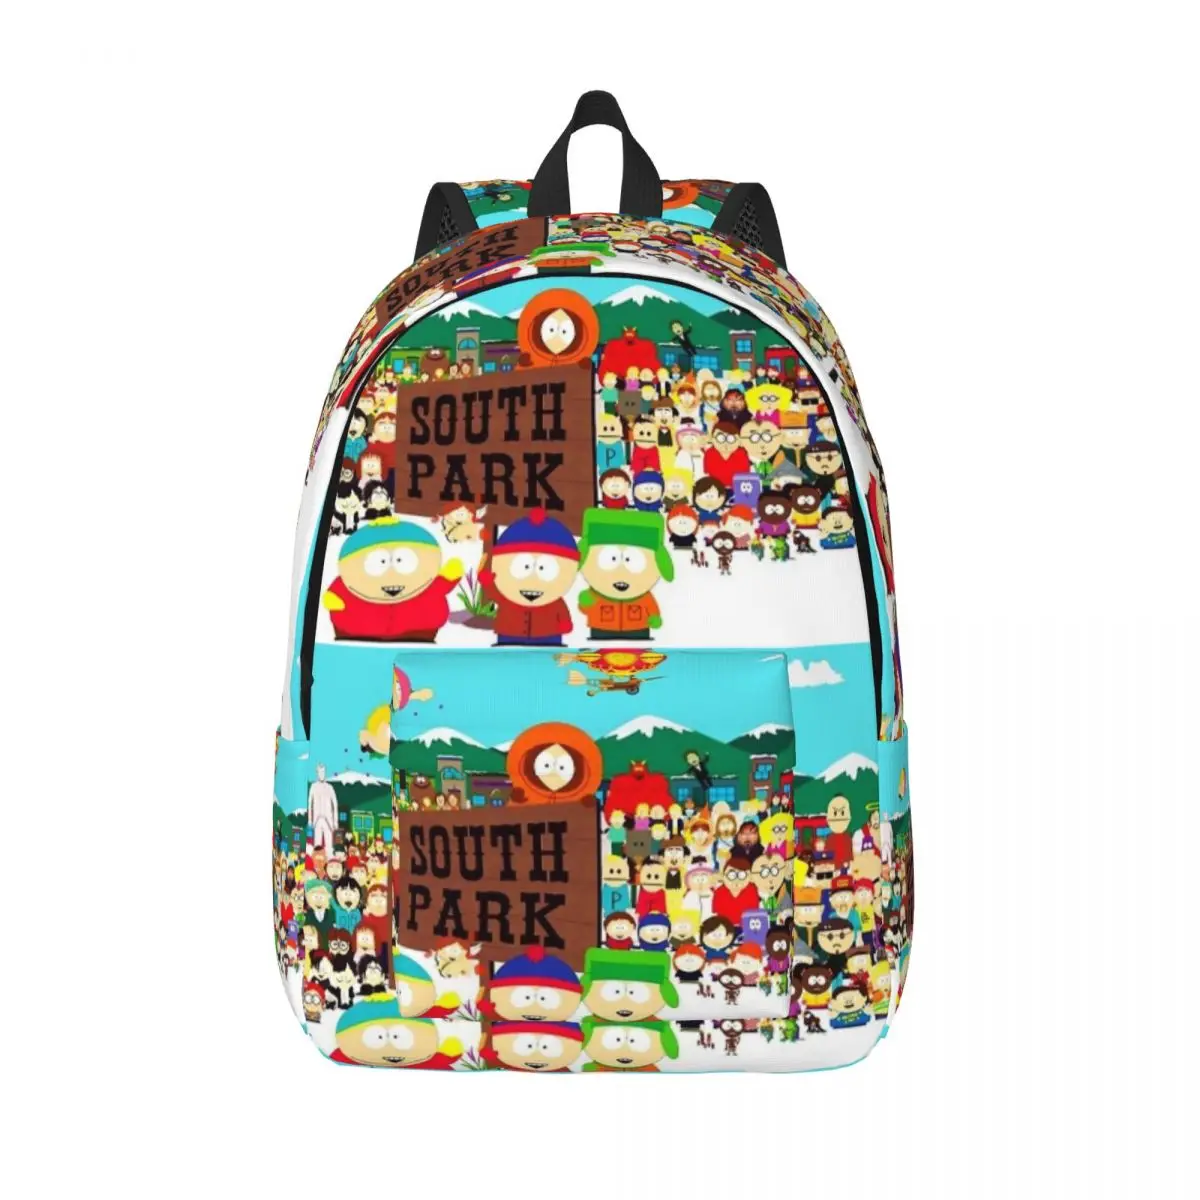 

South-Park All Characters Backpack for Boy Girl Kids Student School Bookbag Cartoon Canvas Daypack Preschool Primary Bag